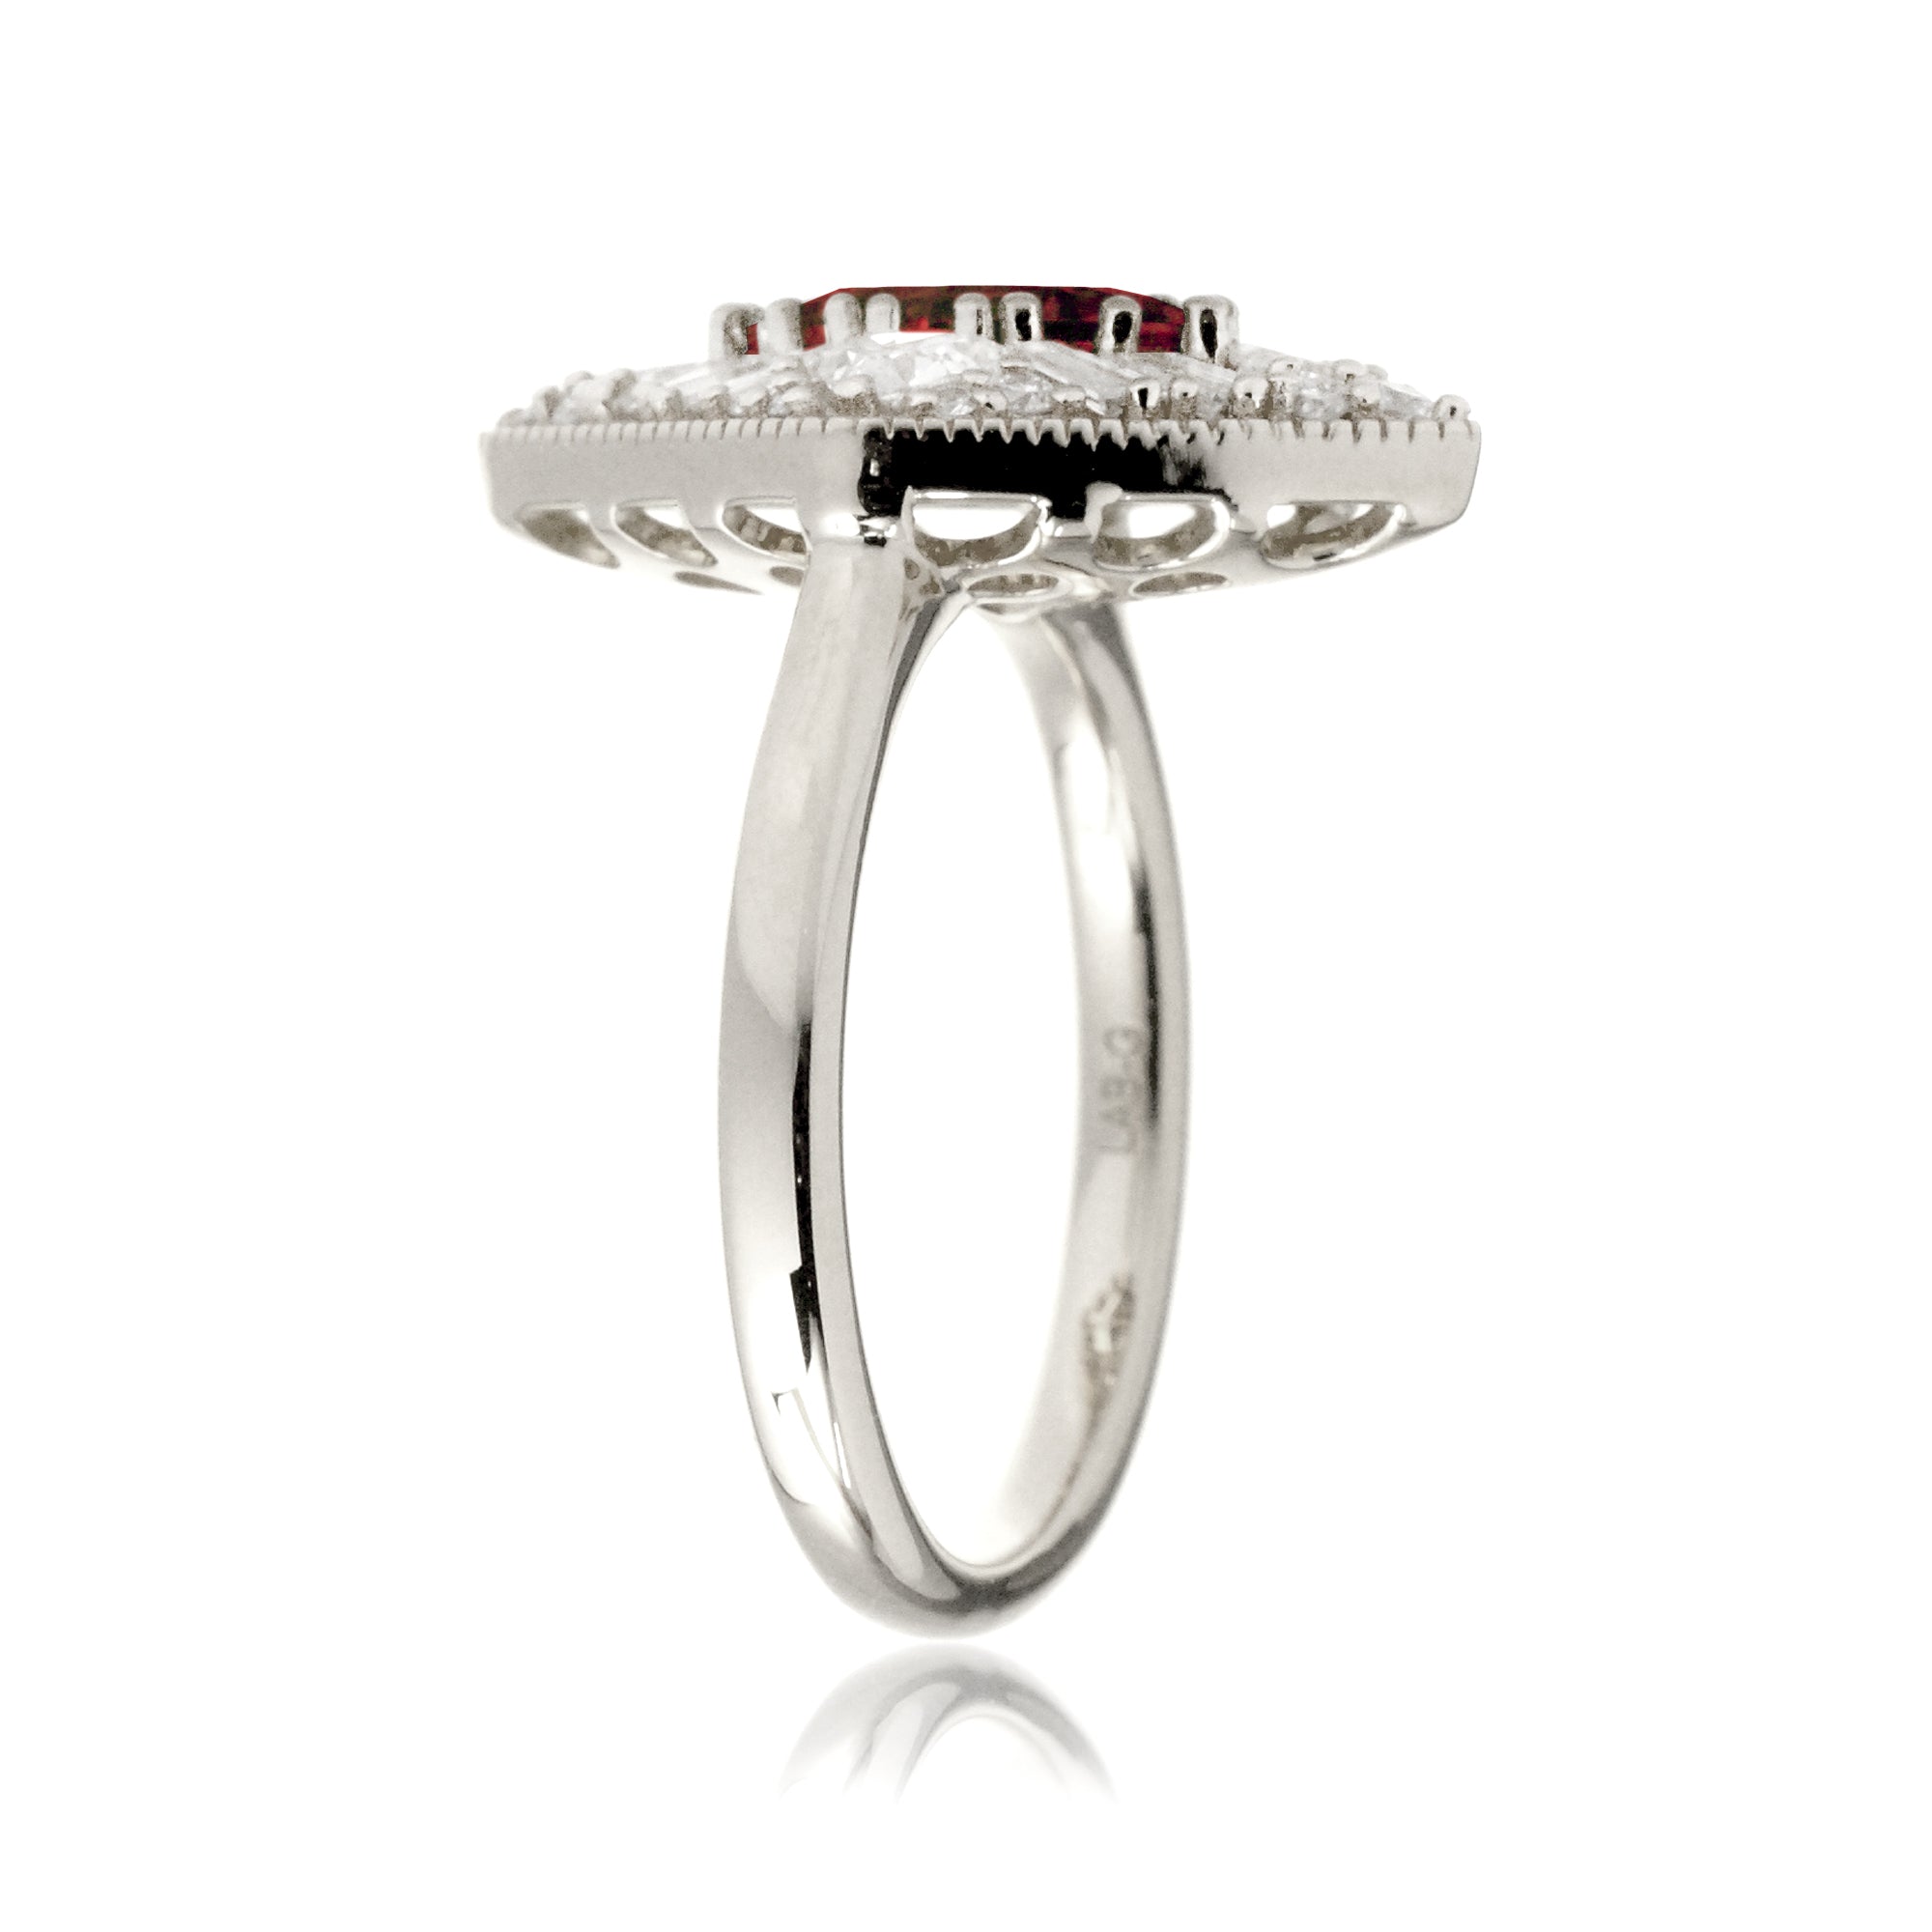 Kite cut ruby and diamond halo ring white gold vintage style